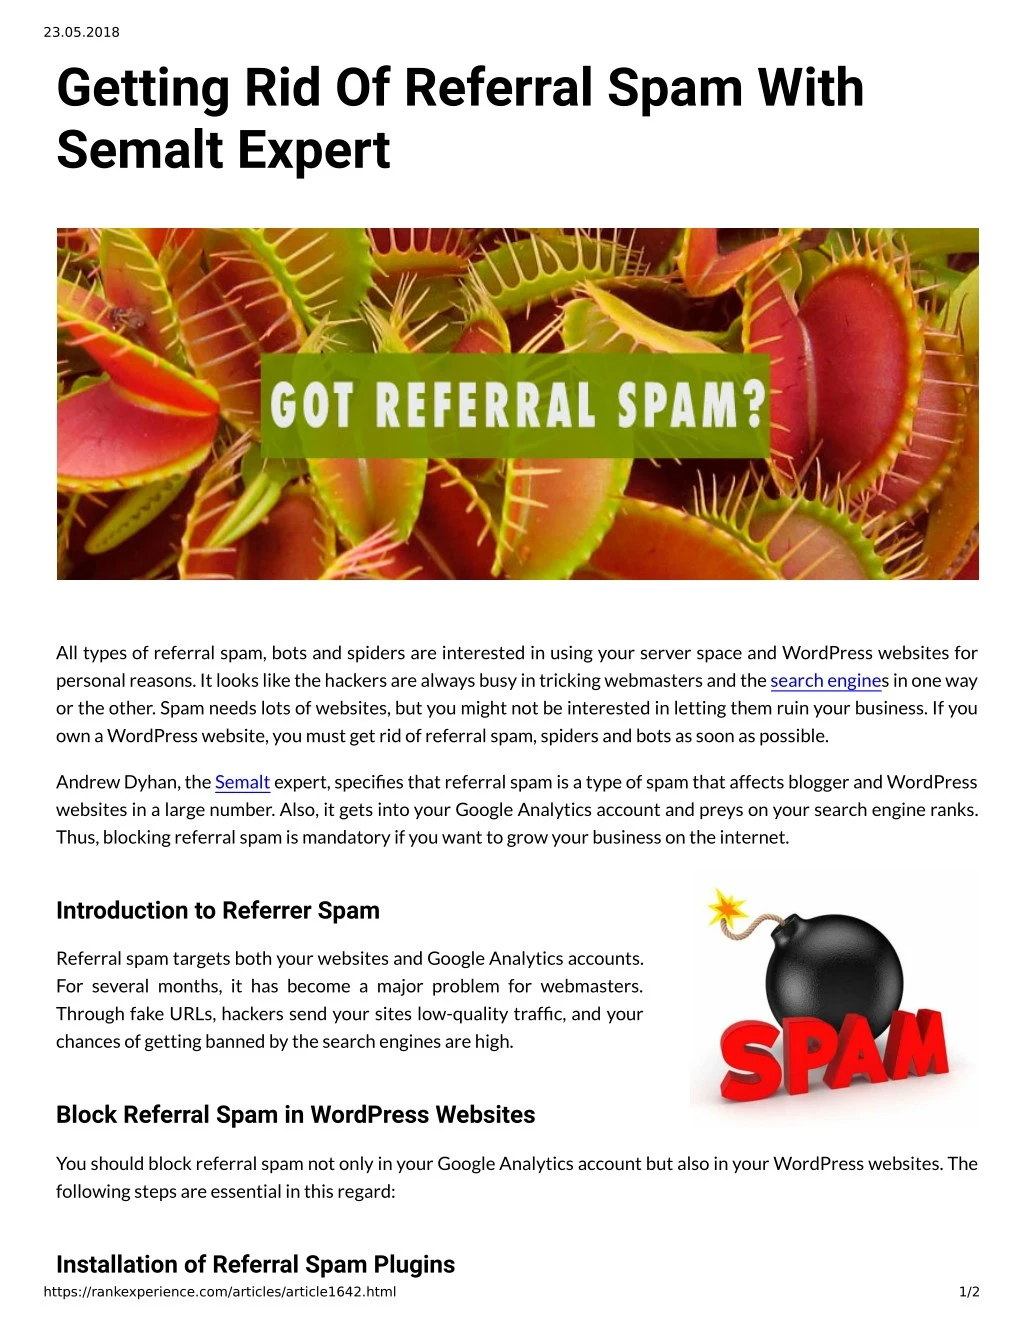 23 05 2018 getting rid of referral spam with